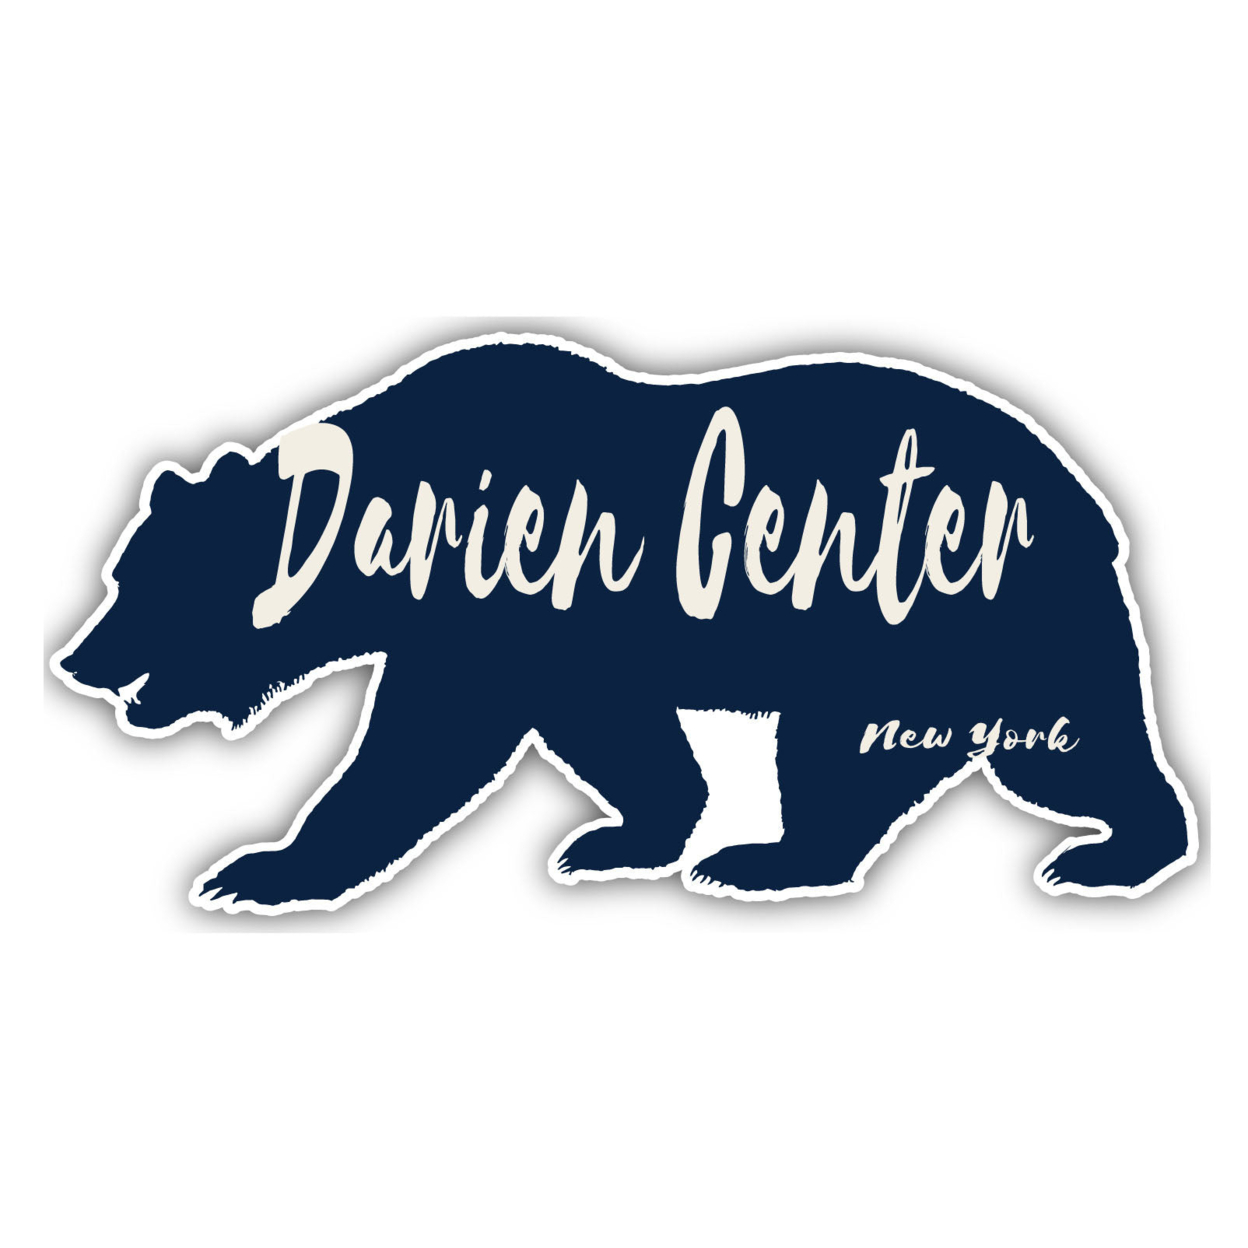 Darien Center New York Souvenir Decorative Stickers (Choose Theme And Size) - 4-Pack, 10-Inch, Tent